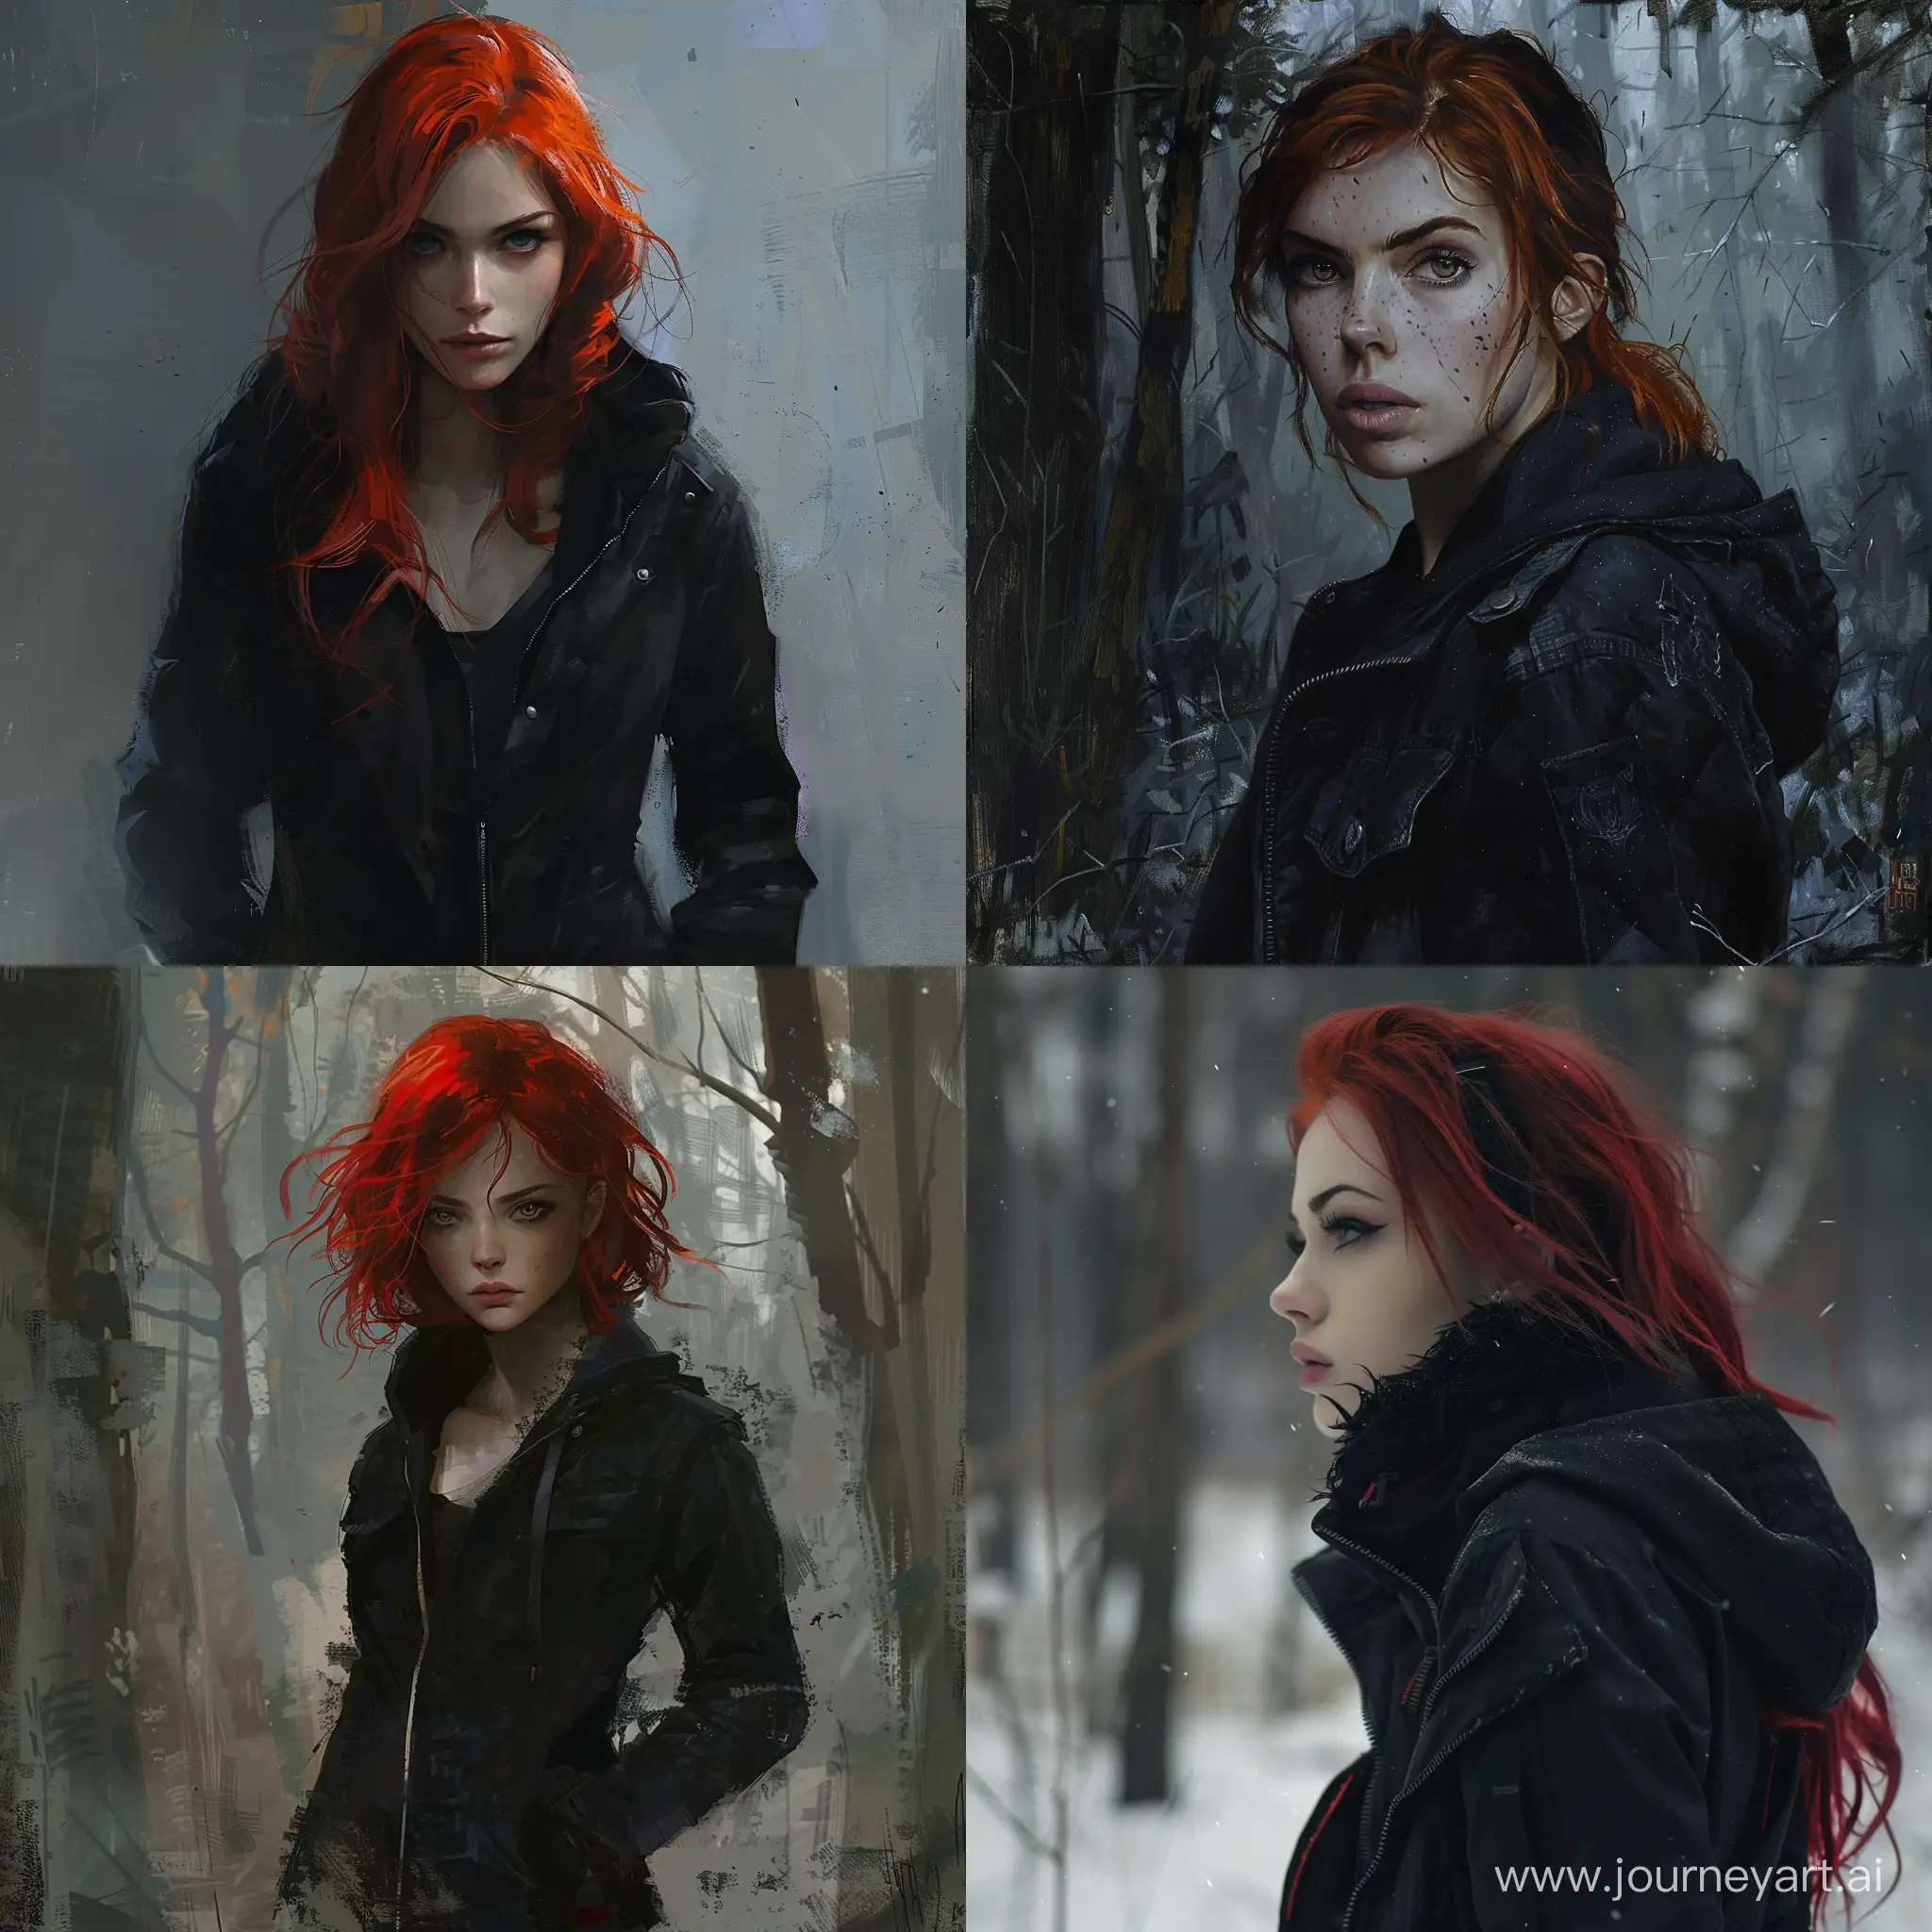 Nocturnal-RedHaired-Huntress-in-Black-Jacket